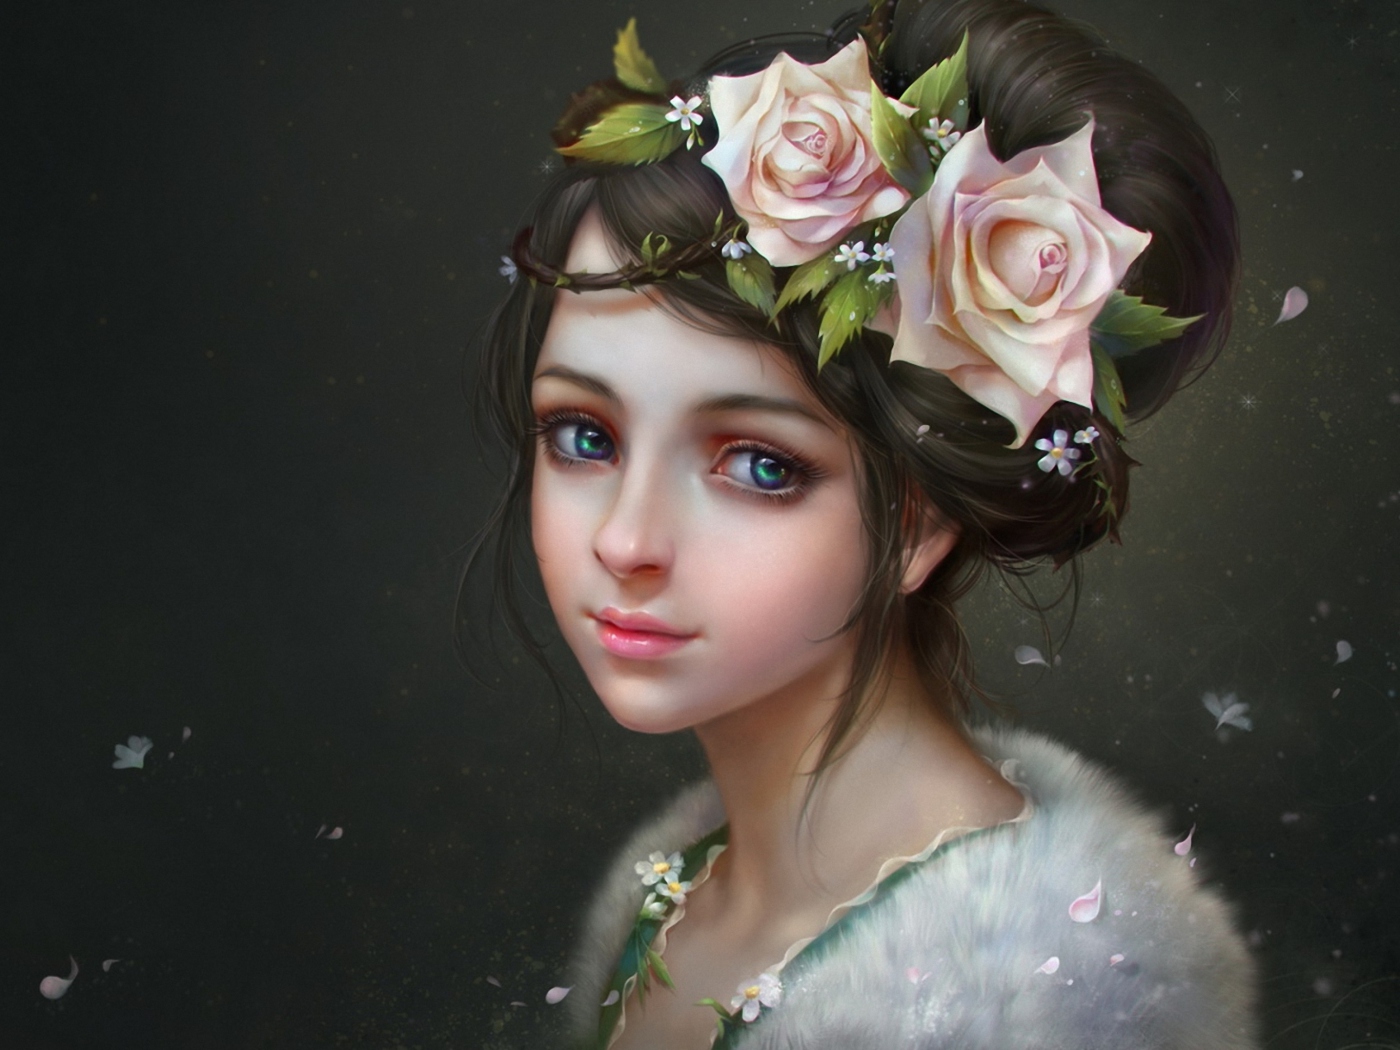 Girl With Roses In Her Hair Painting wallpaper 1400x1050